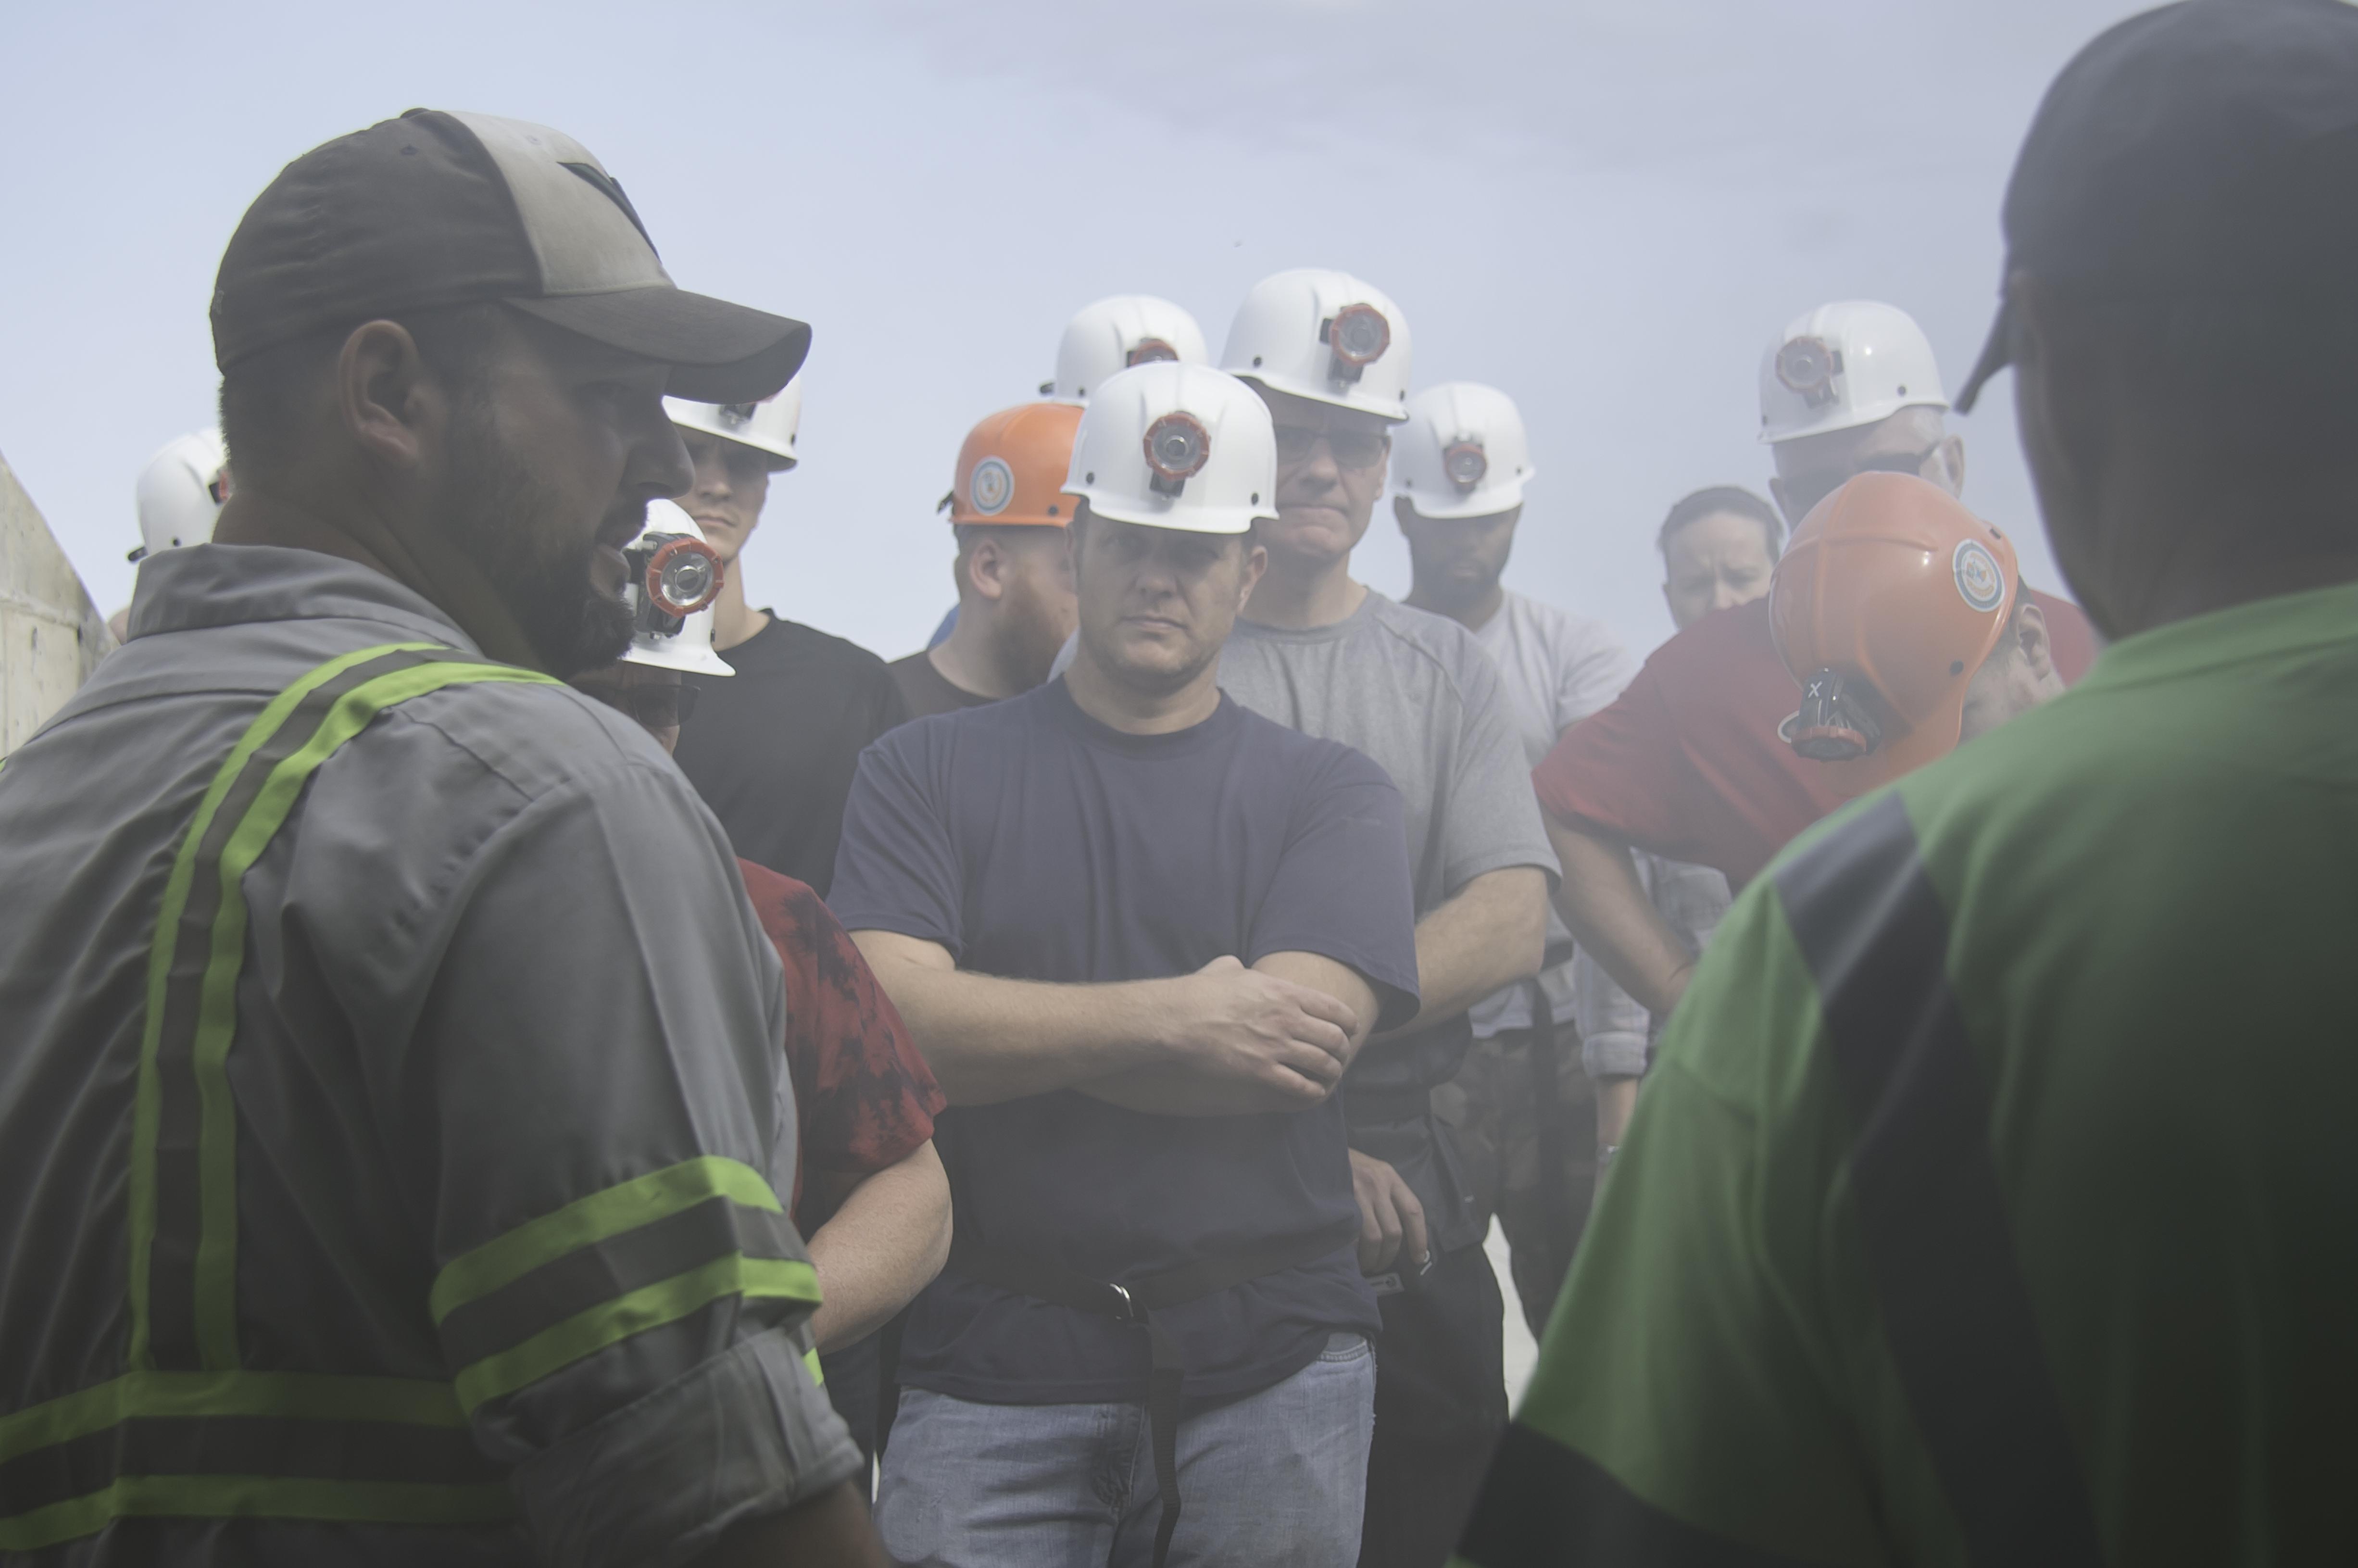 A group of miners standing together